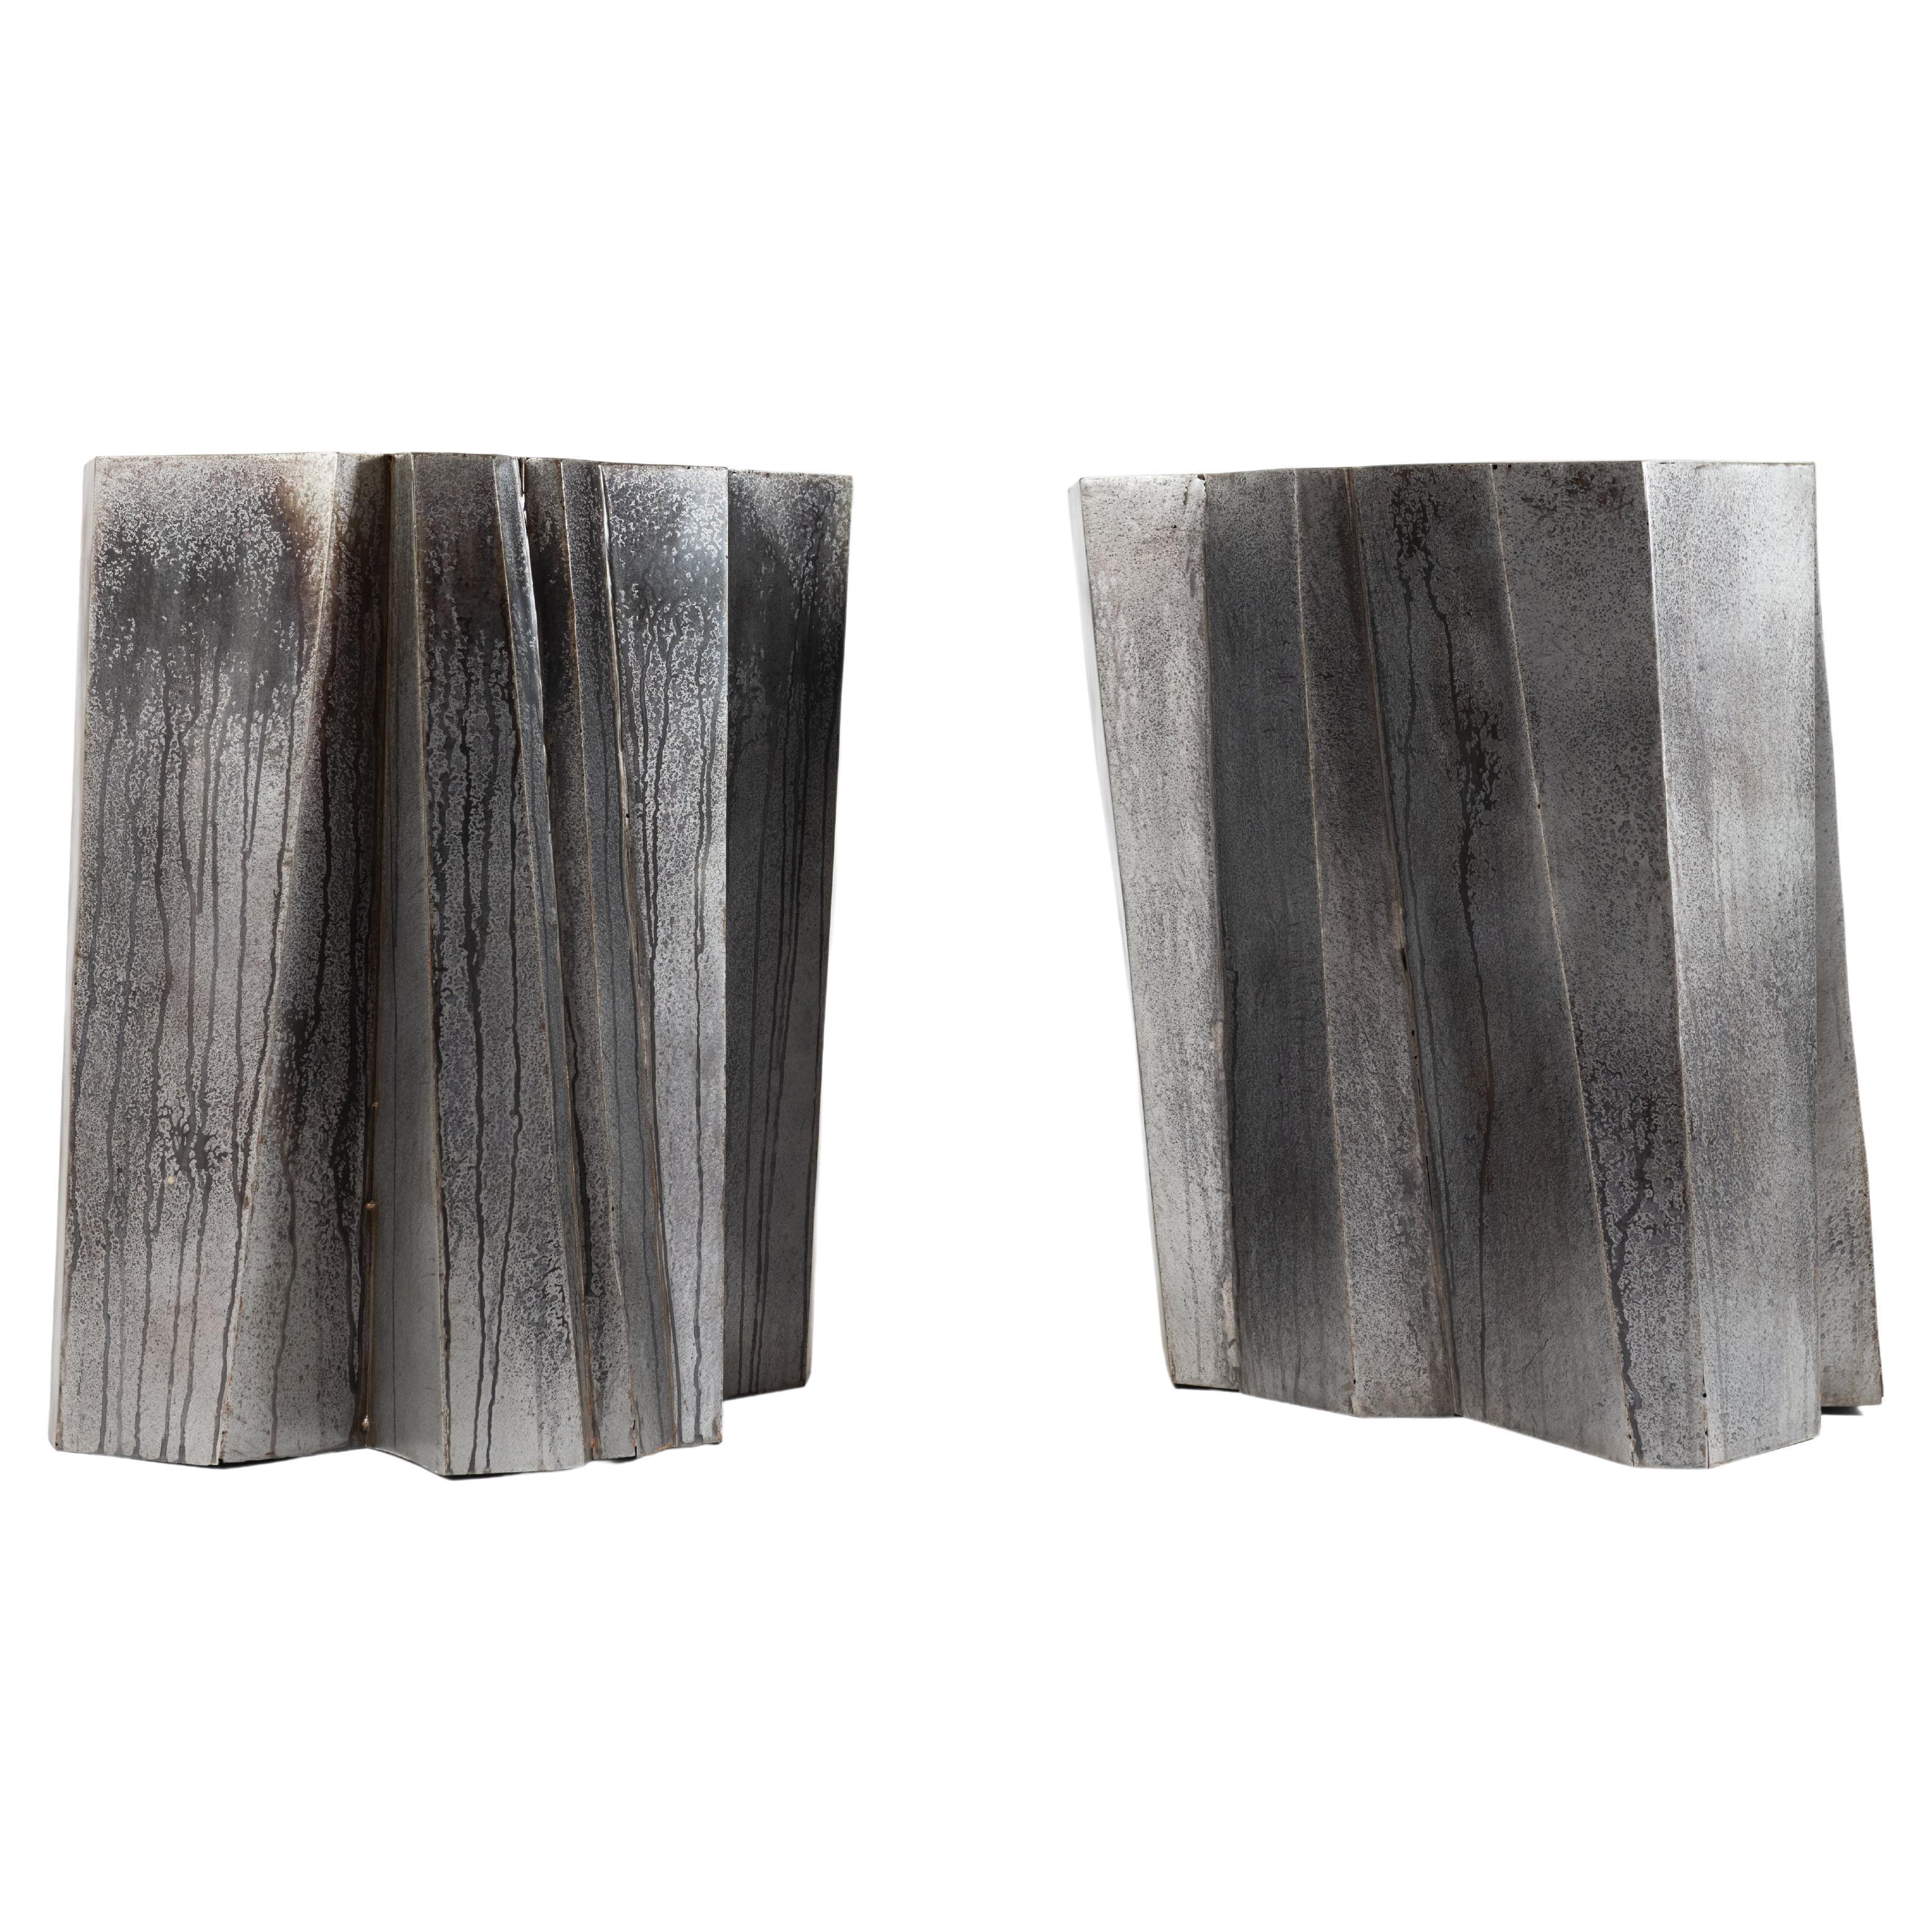 Pair of Cleaving Side Tables in Stainless Steal by Gregory Nangle For Sale